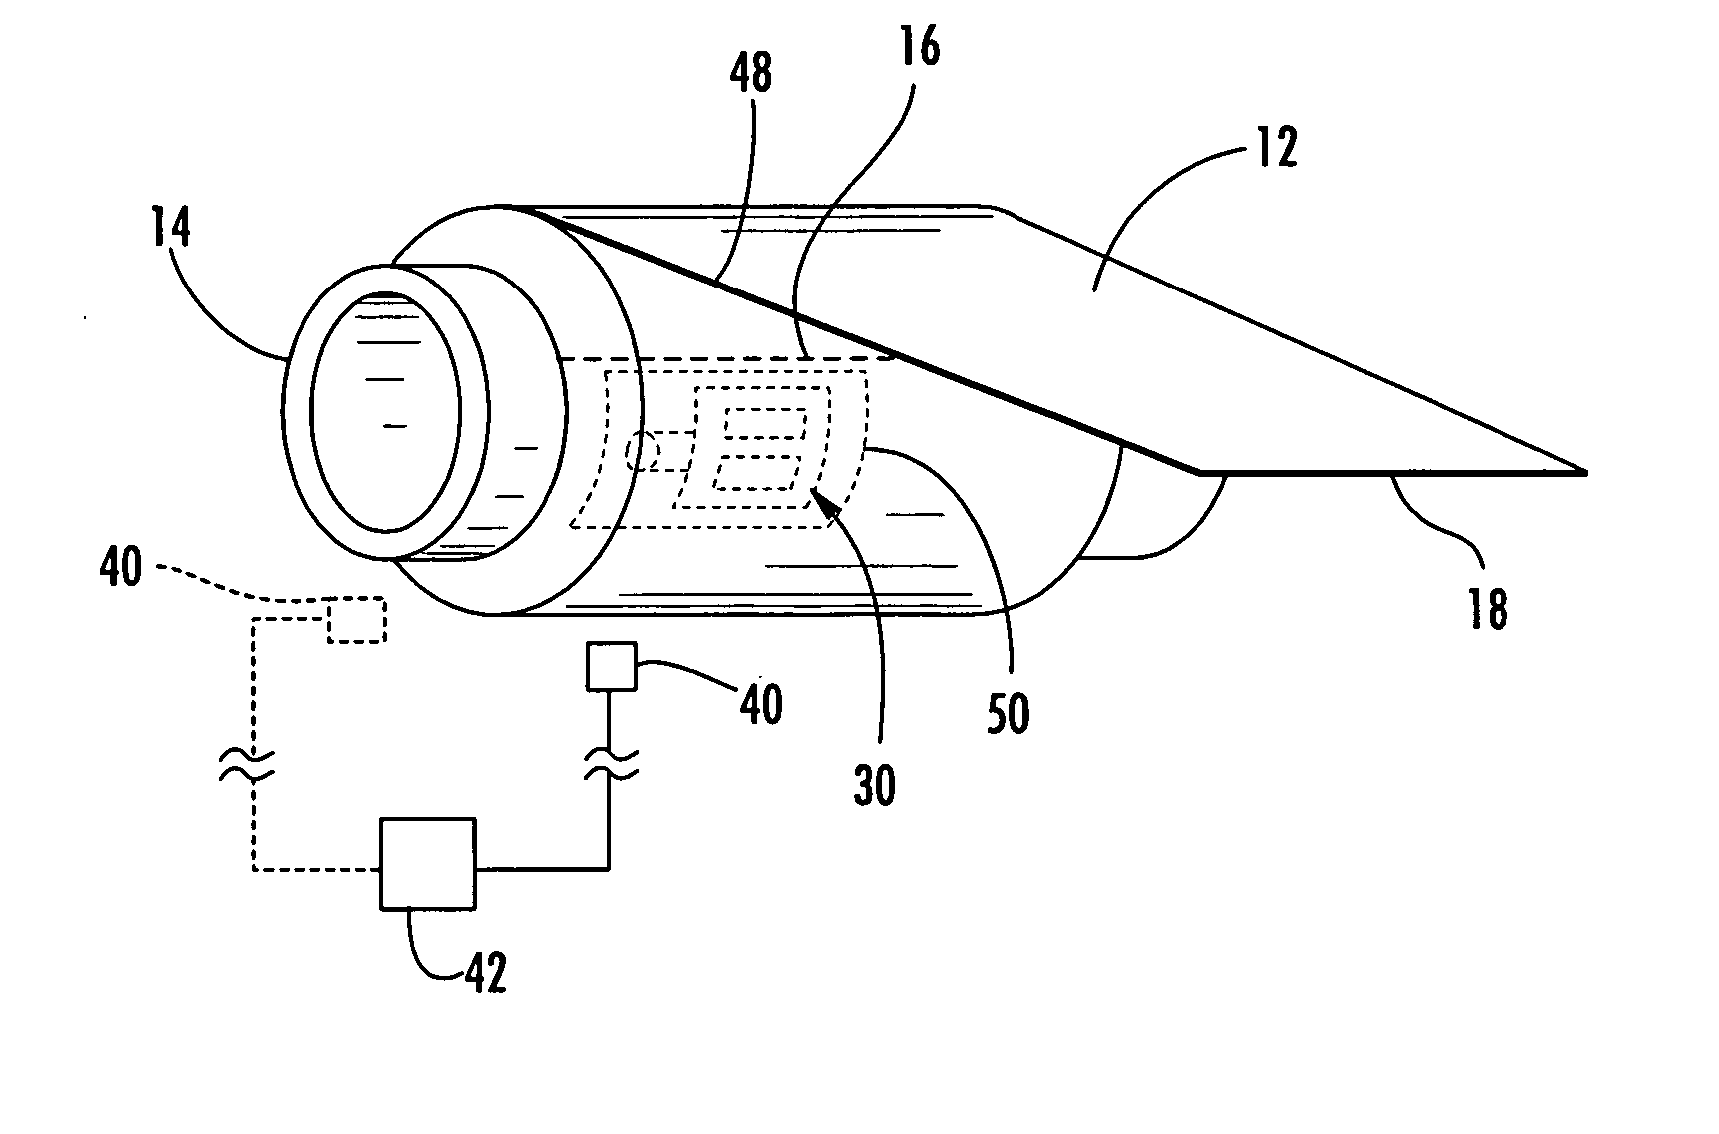 Systems and methods for providing a media located on a spool and/or a cartridge where the media includes a wireless communication device attached thereto